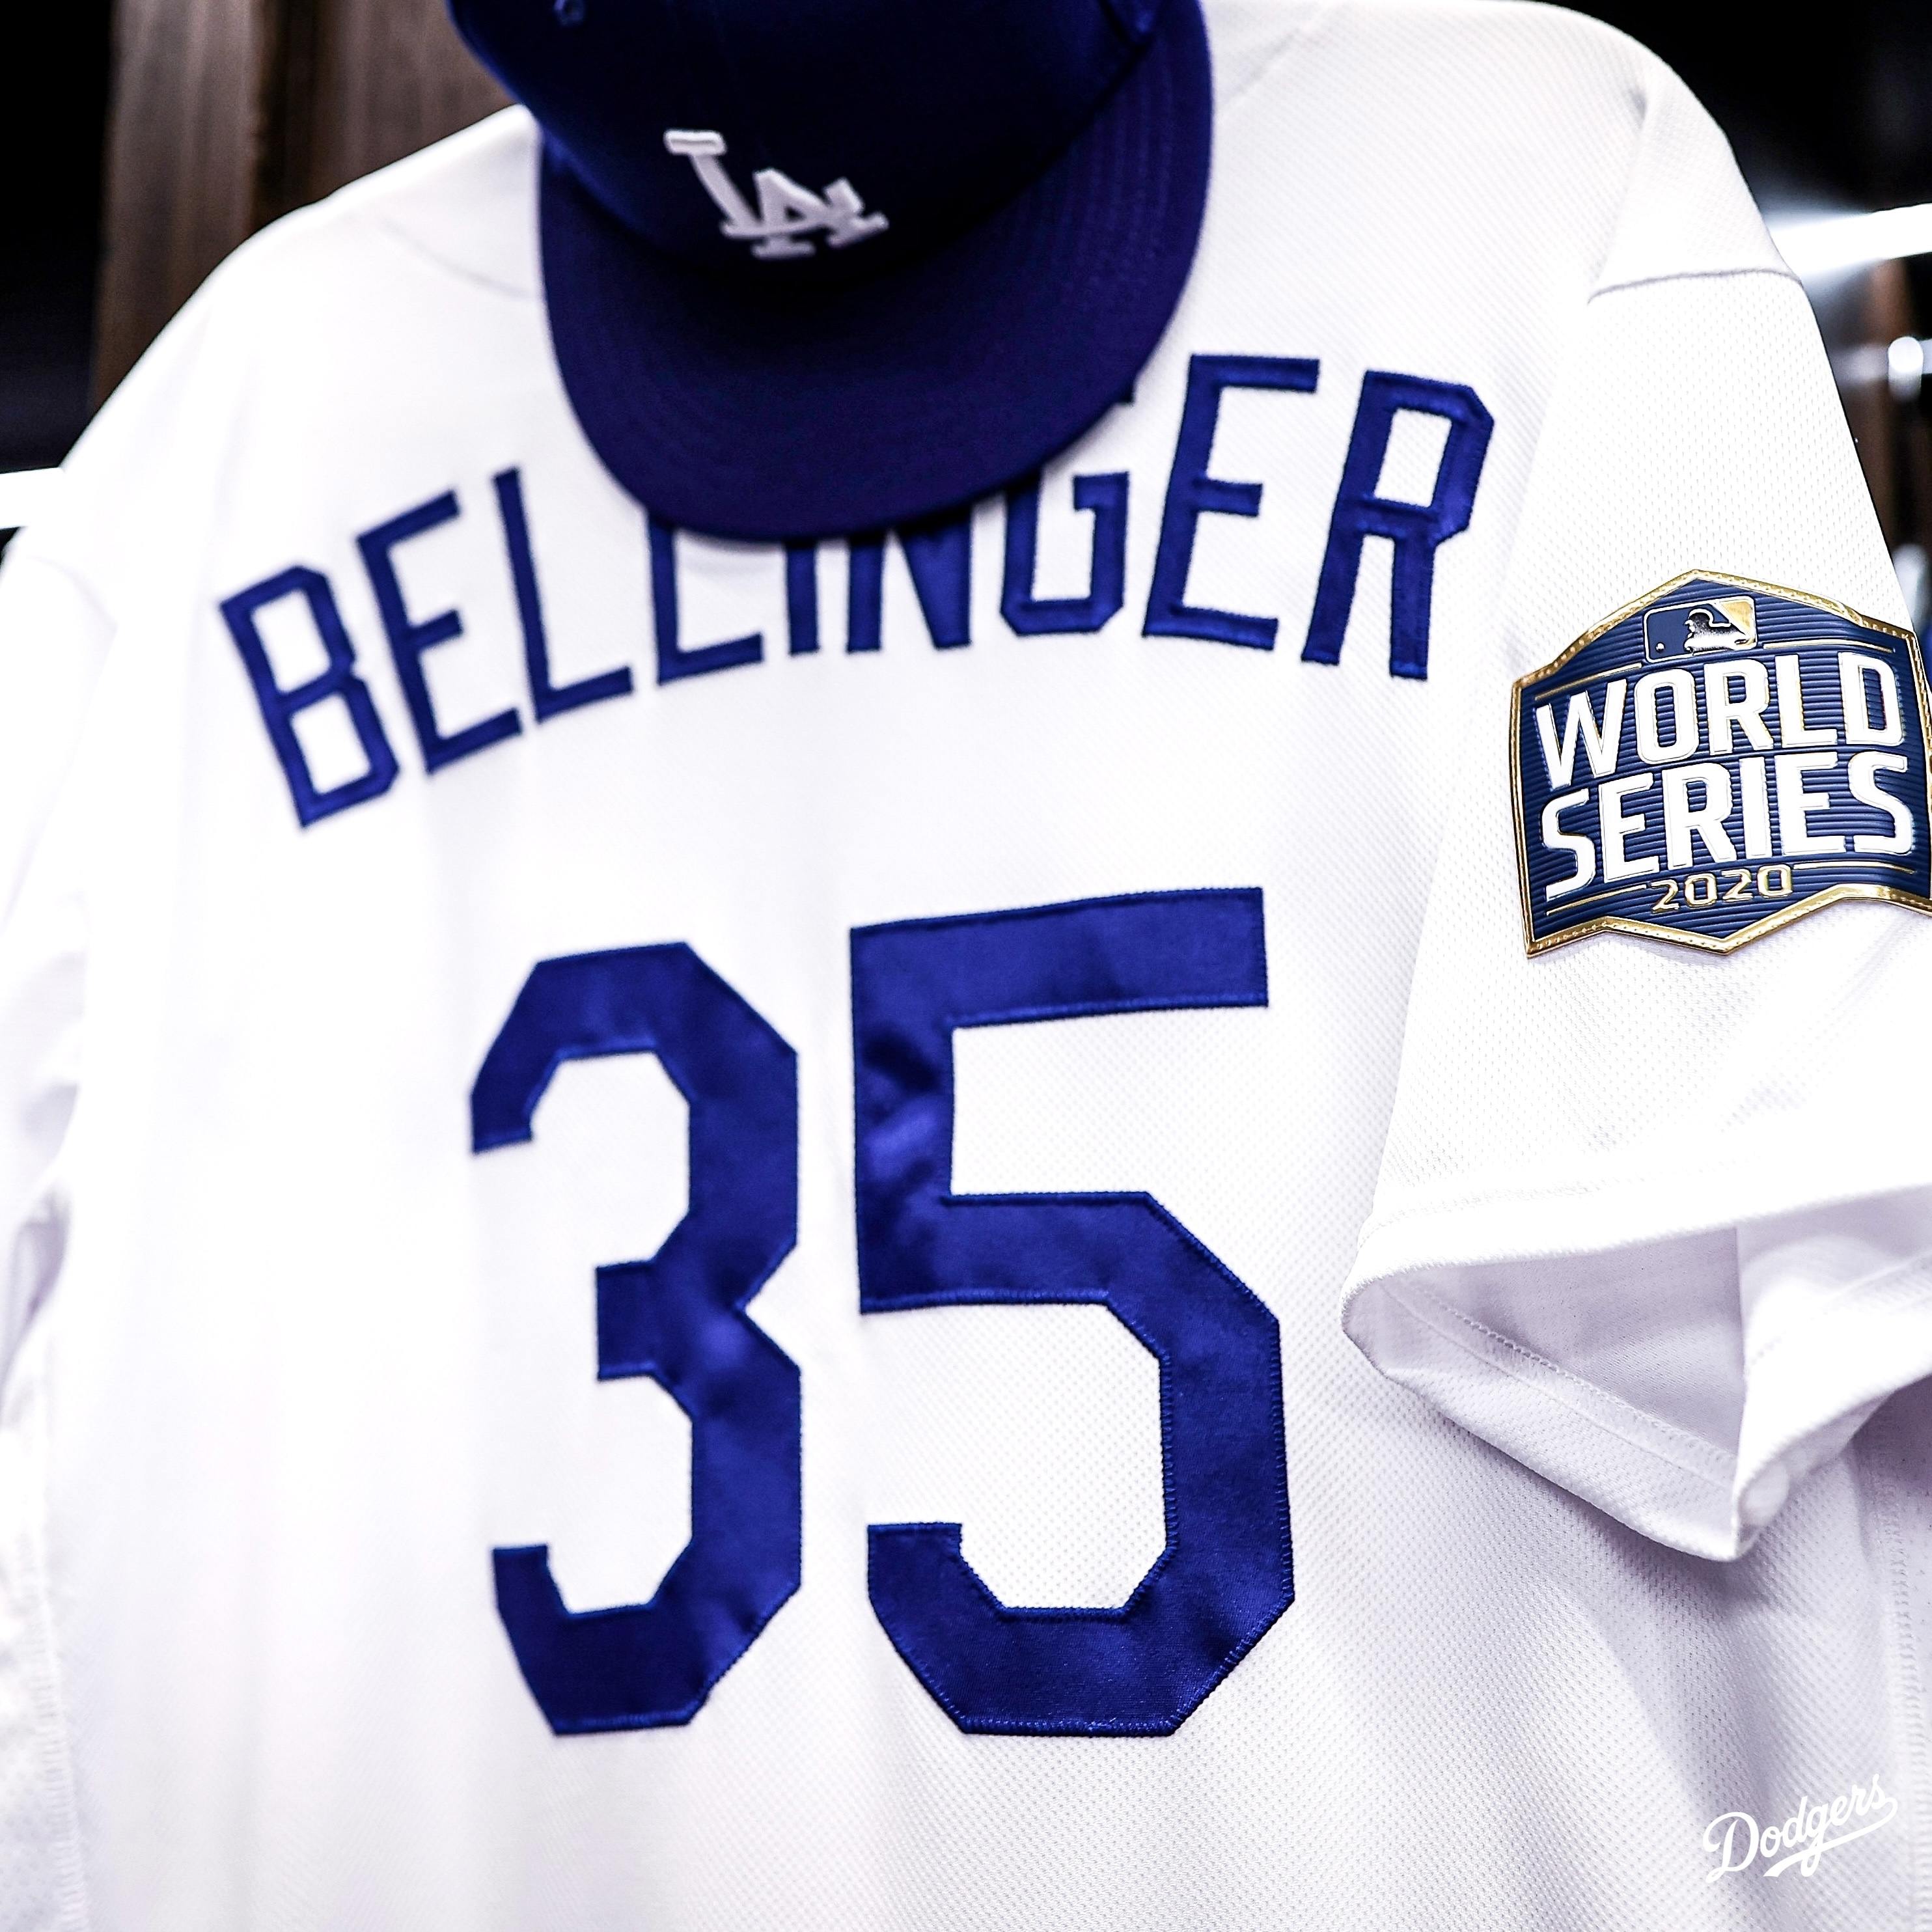 Los Angeles Dodgers on X: The top two most popular player jerseys